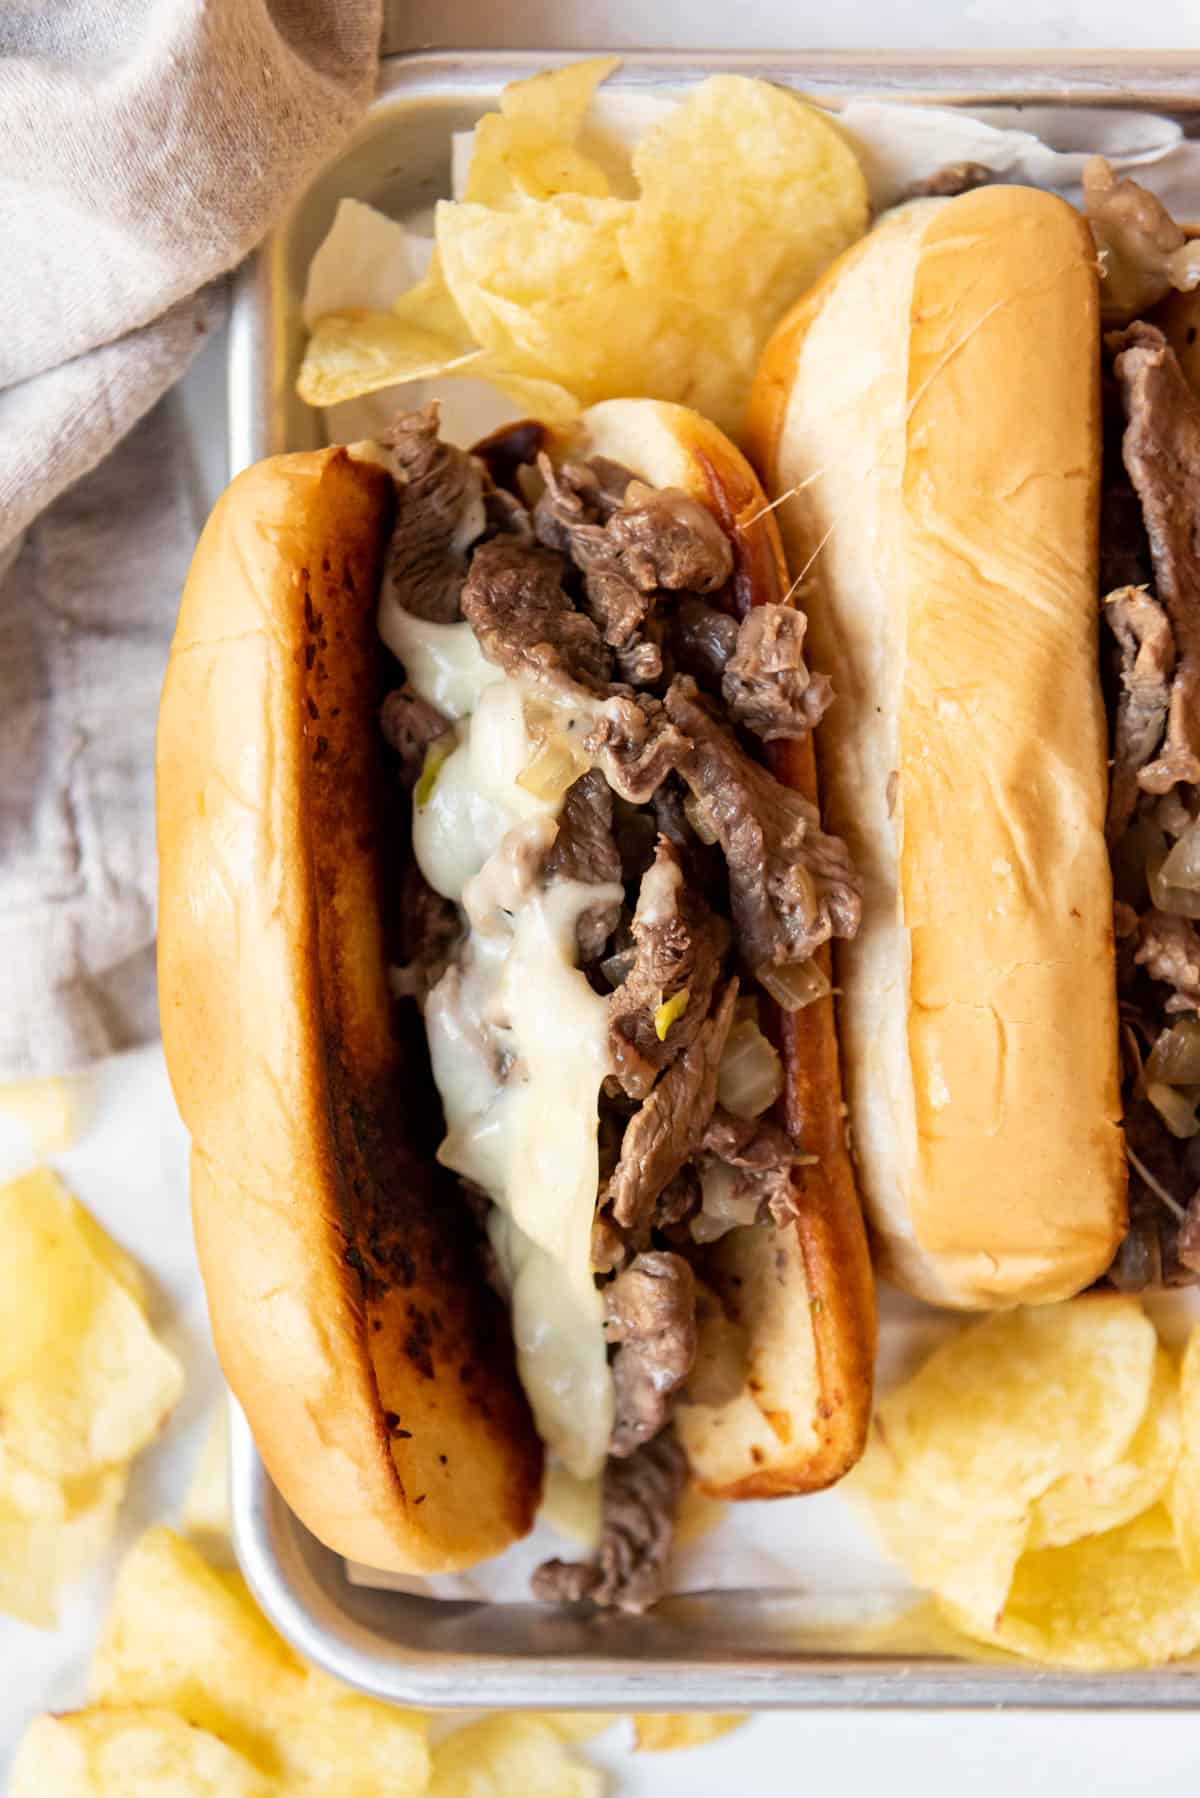 Philly cheese steak sandwiches next to potato chips.